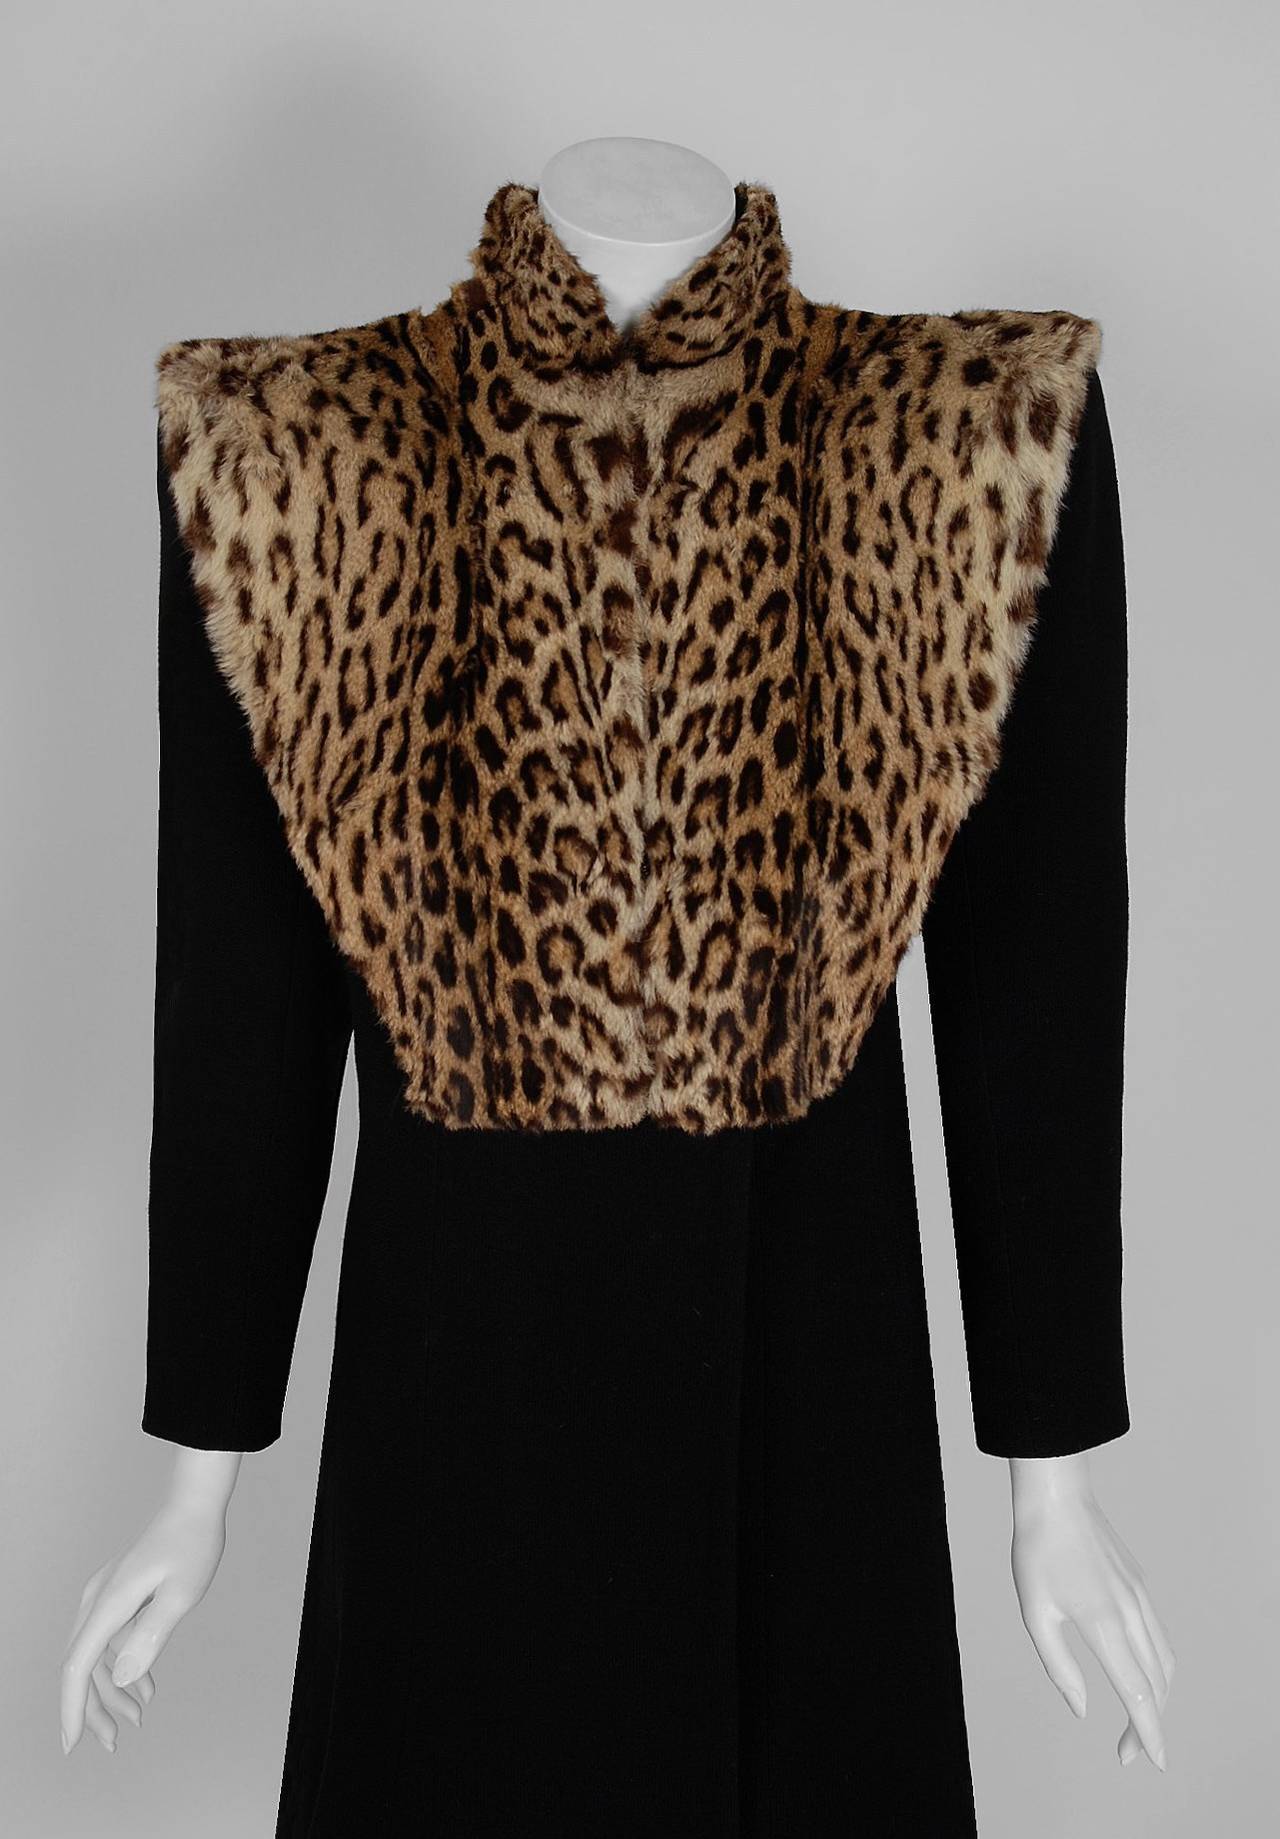 This exquisite early 1940's black wool-crepe and genuine geoffroy-cat fur coat will make any woman shine during the upcoming cold winter months! The breathtaking spotted fur has been worked into a unique high-collar bib and the effect is really